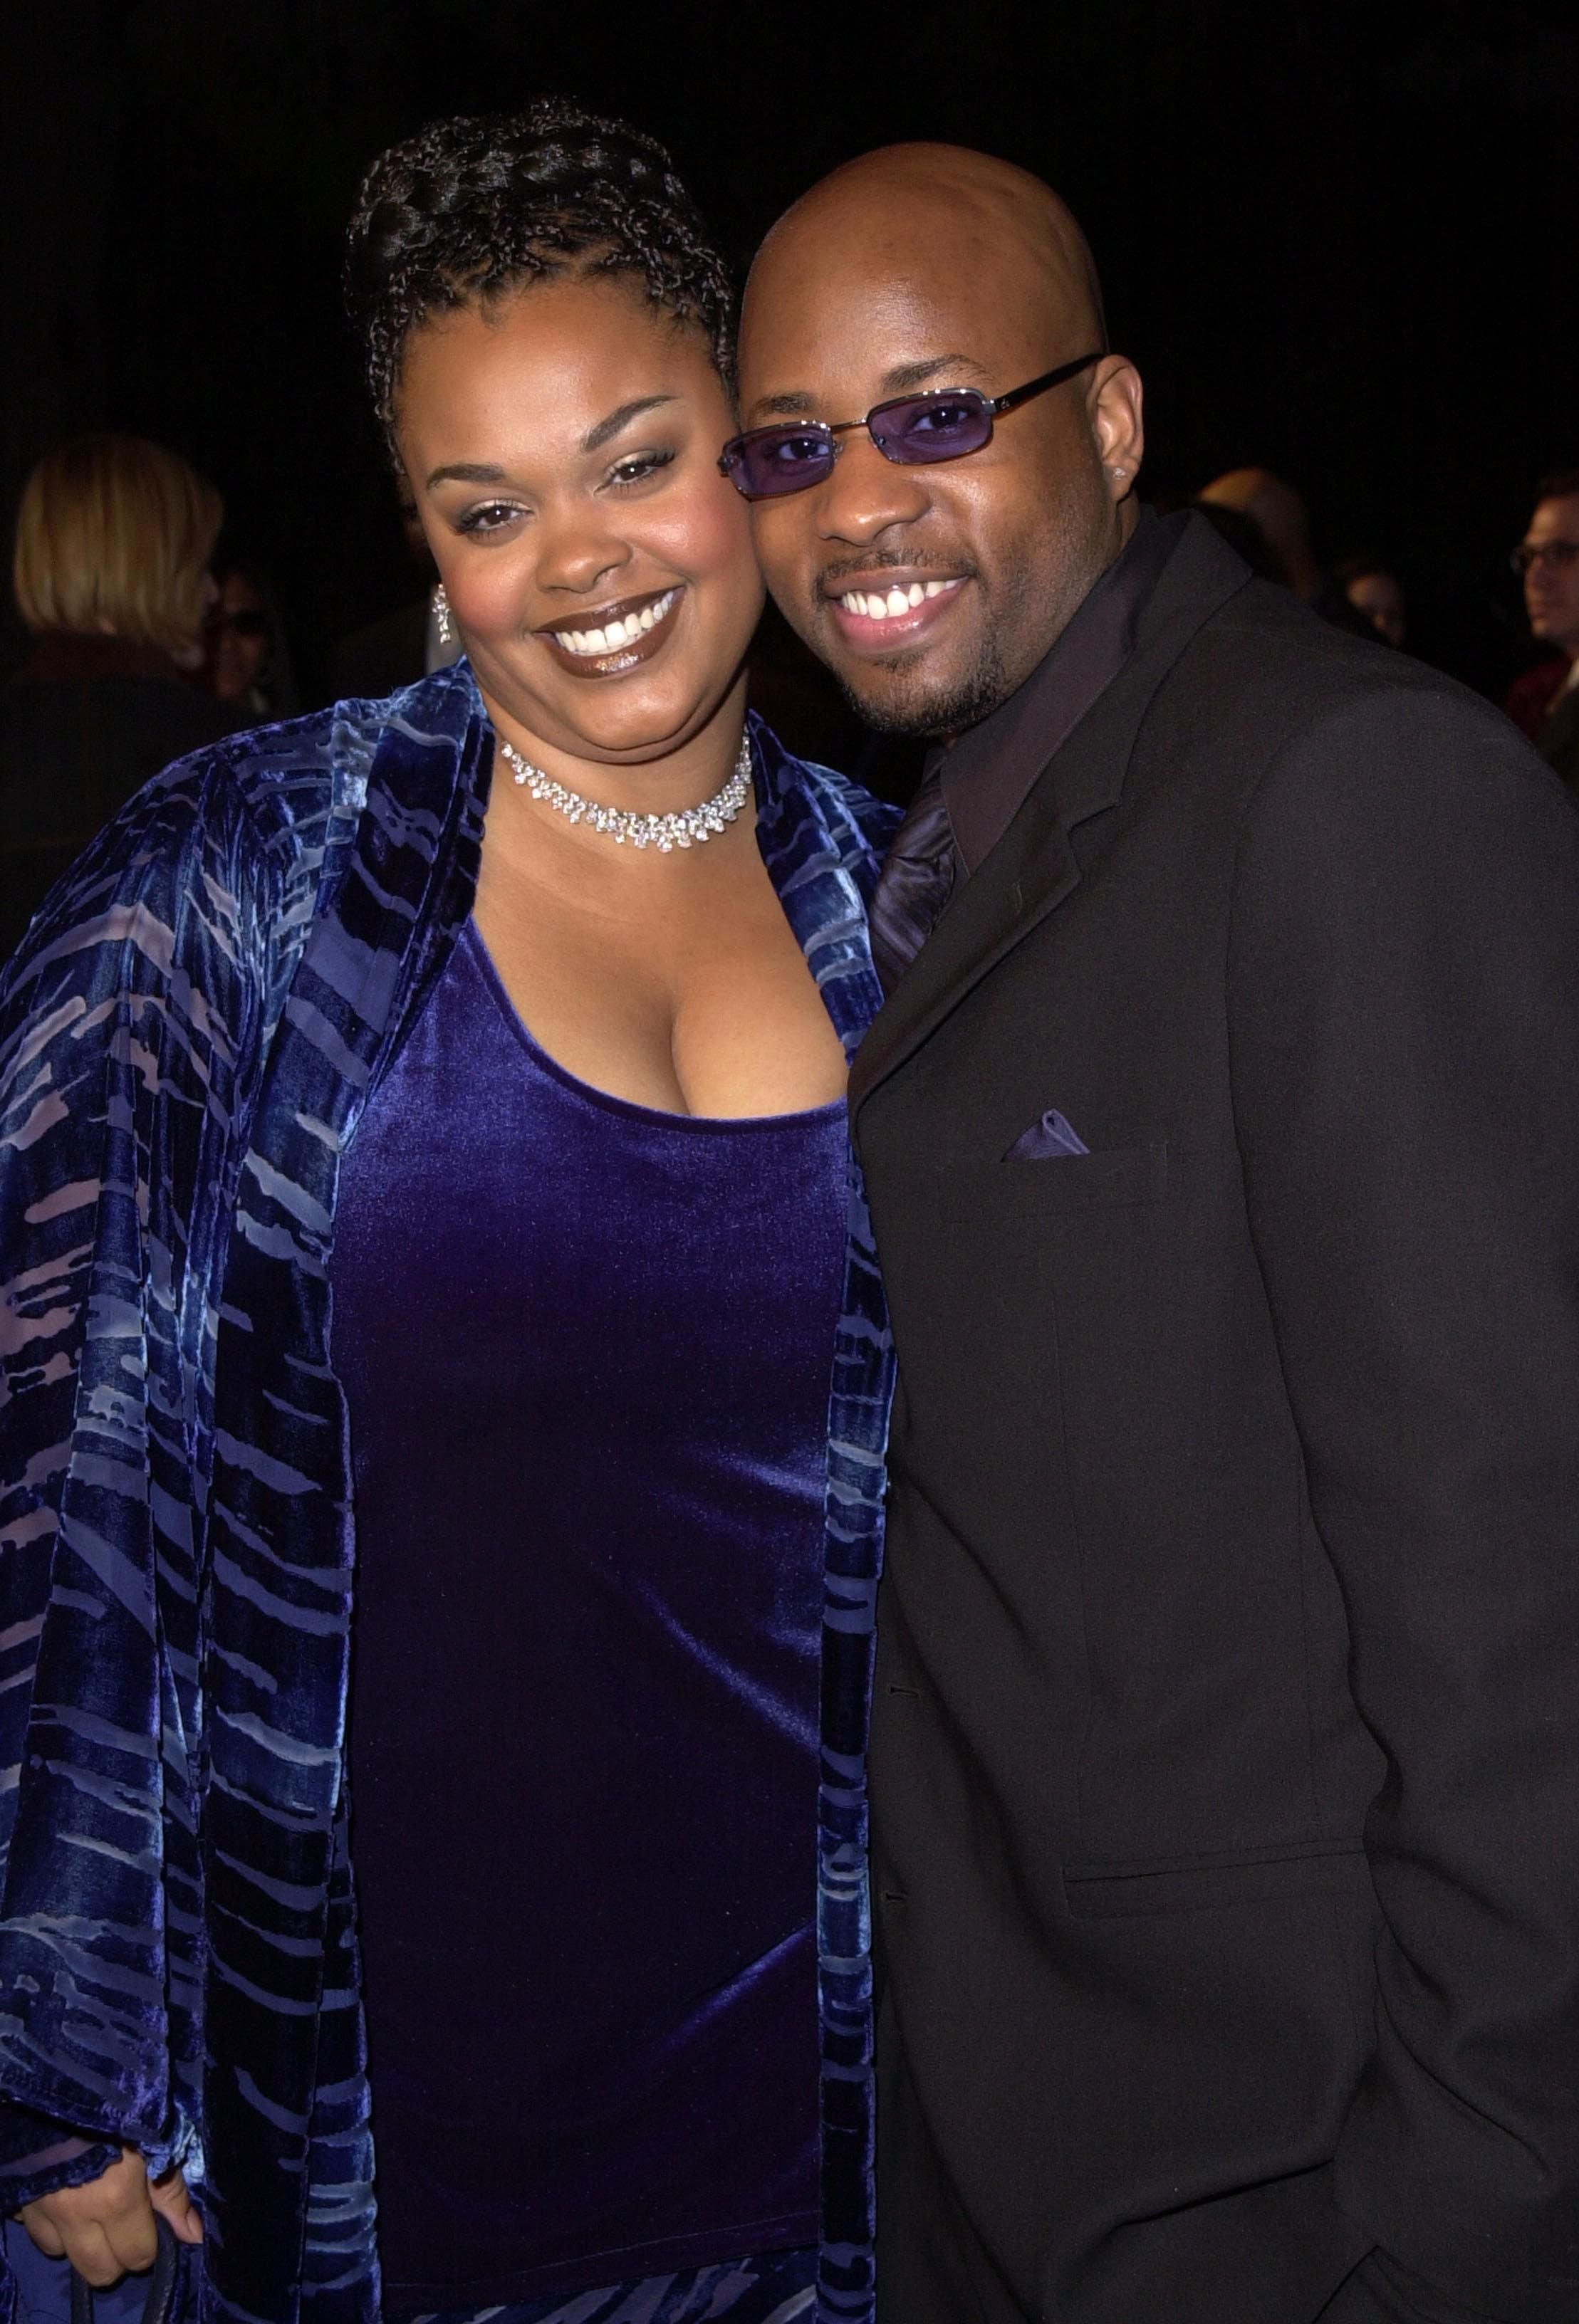 Jill Scott & husband Lyzel Williams at the 32nd Annual NAACP Image Awards in 2001 | Source: Getty Images